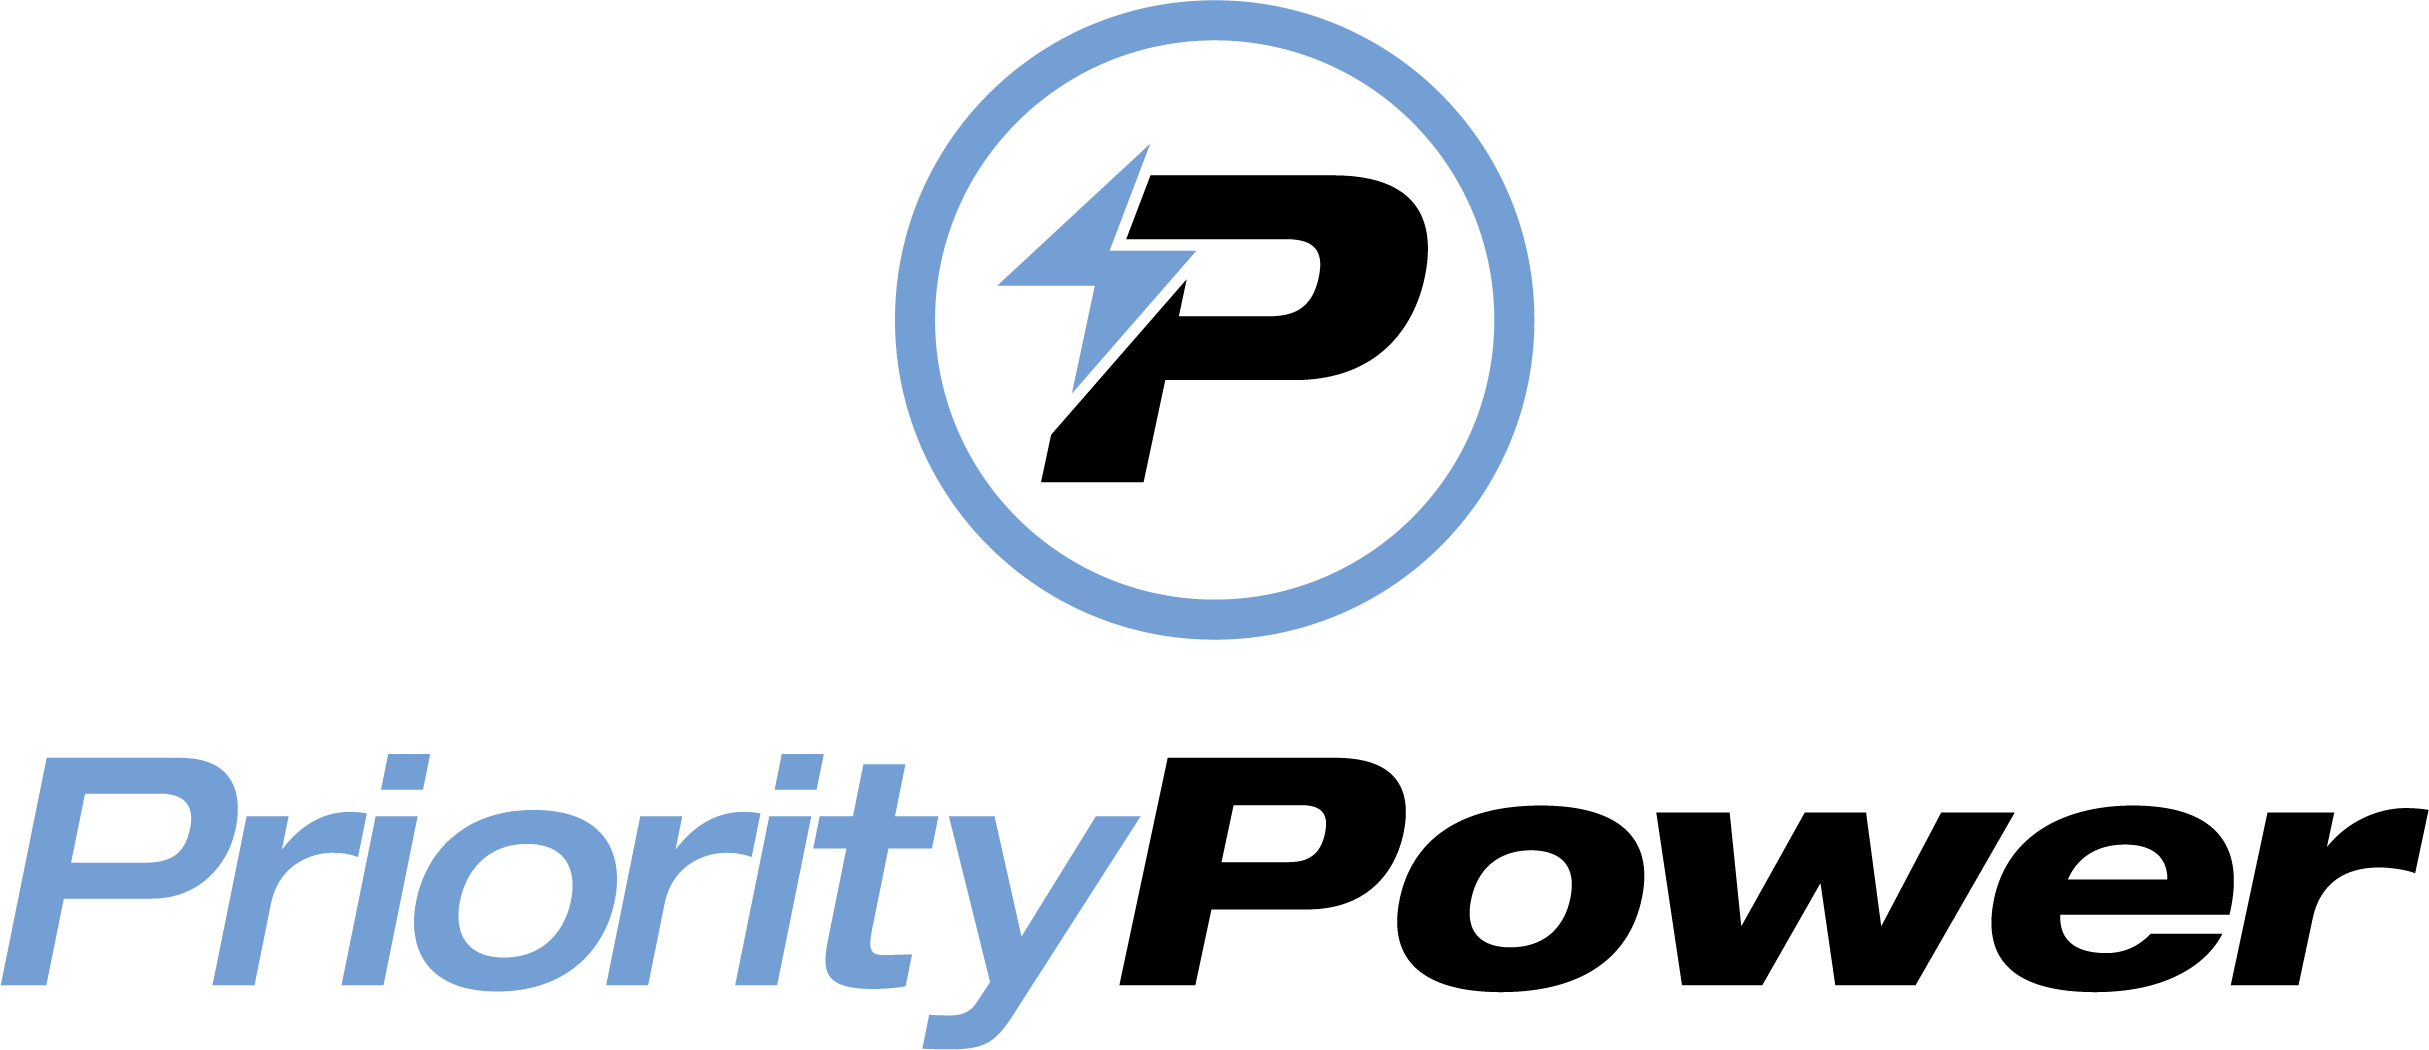 PriorityPower_logo_stacked_blackletters@4x